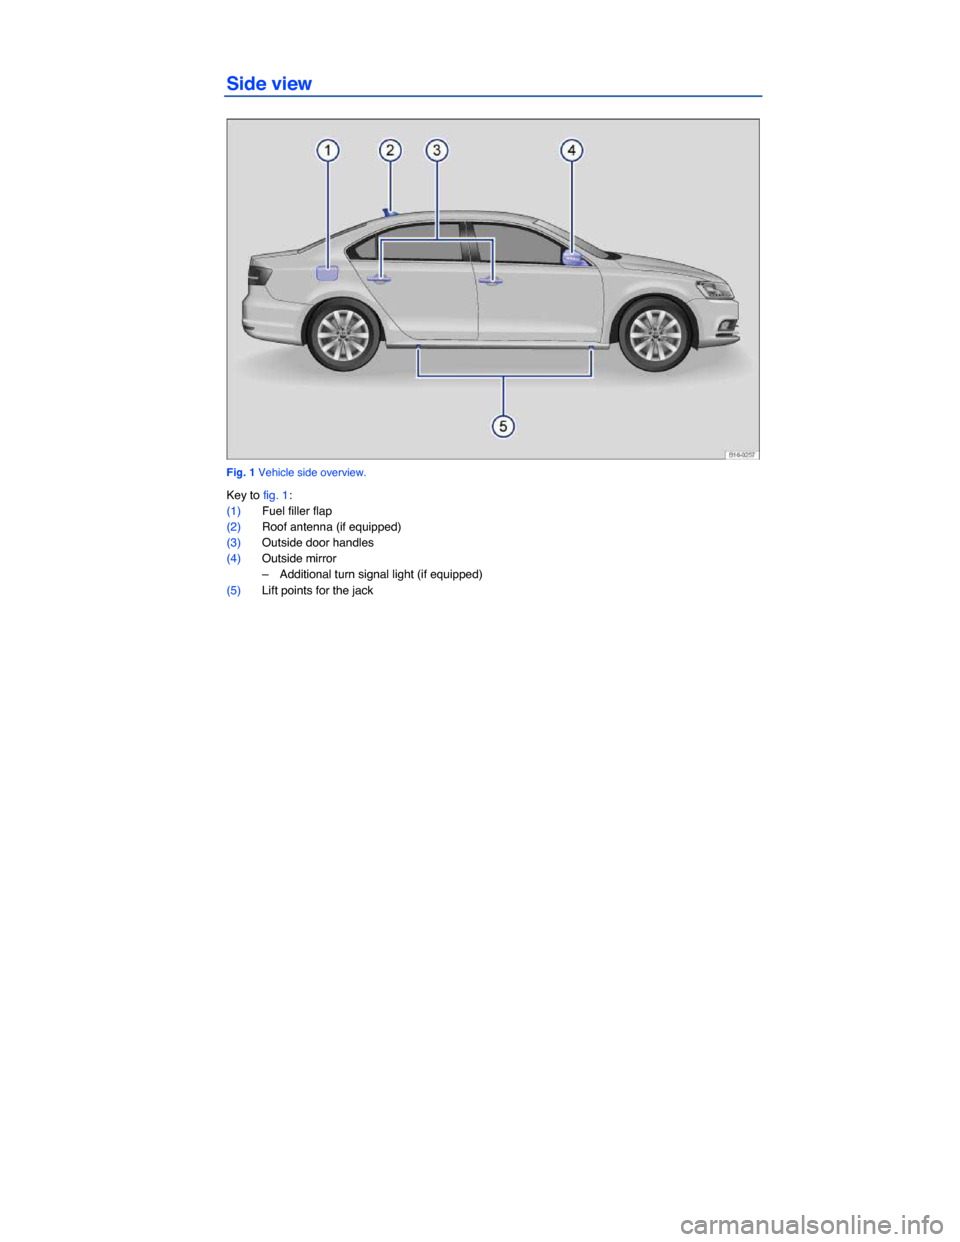 VOLKSWAGEN JETTA 2015 1B / 6.G Owners Manual  
Side view 
 
Fig. 1 Vehicle side overview. 
Key to fig. 1: 
(1) Fuel filler flap  
(2) Roof antenna (if equipped)  
(3) Outside door handles  
(4) Outside mirror  
–  Additional turn signal light 